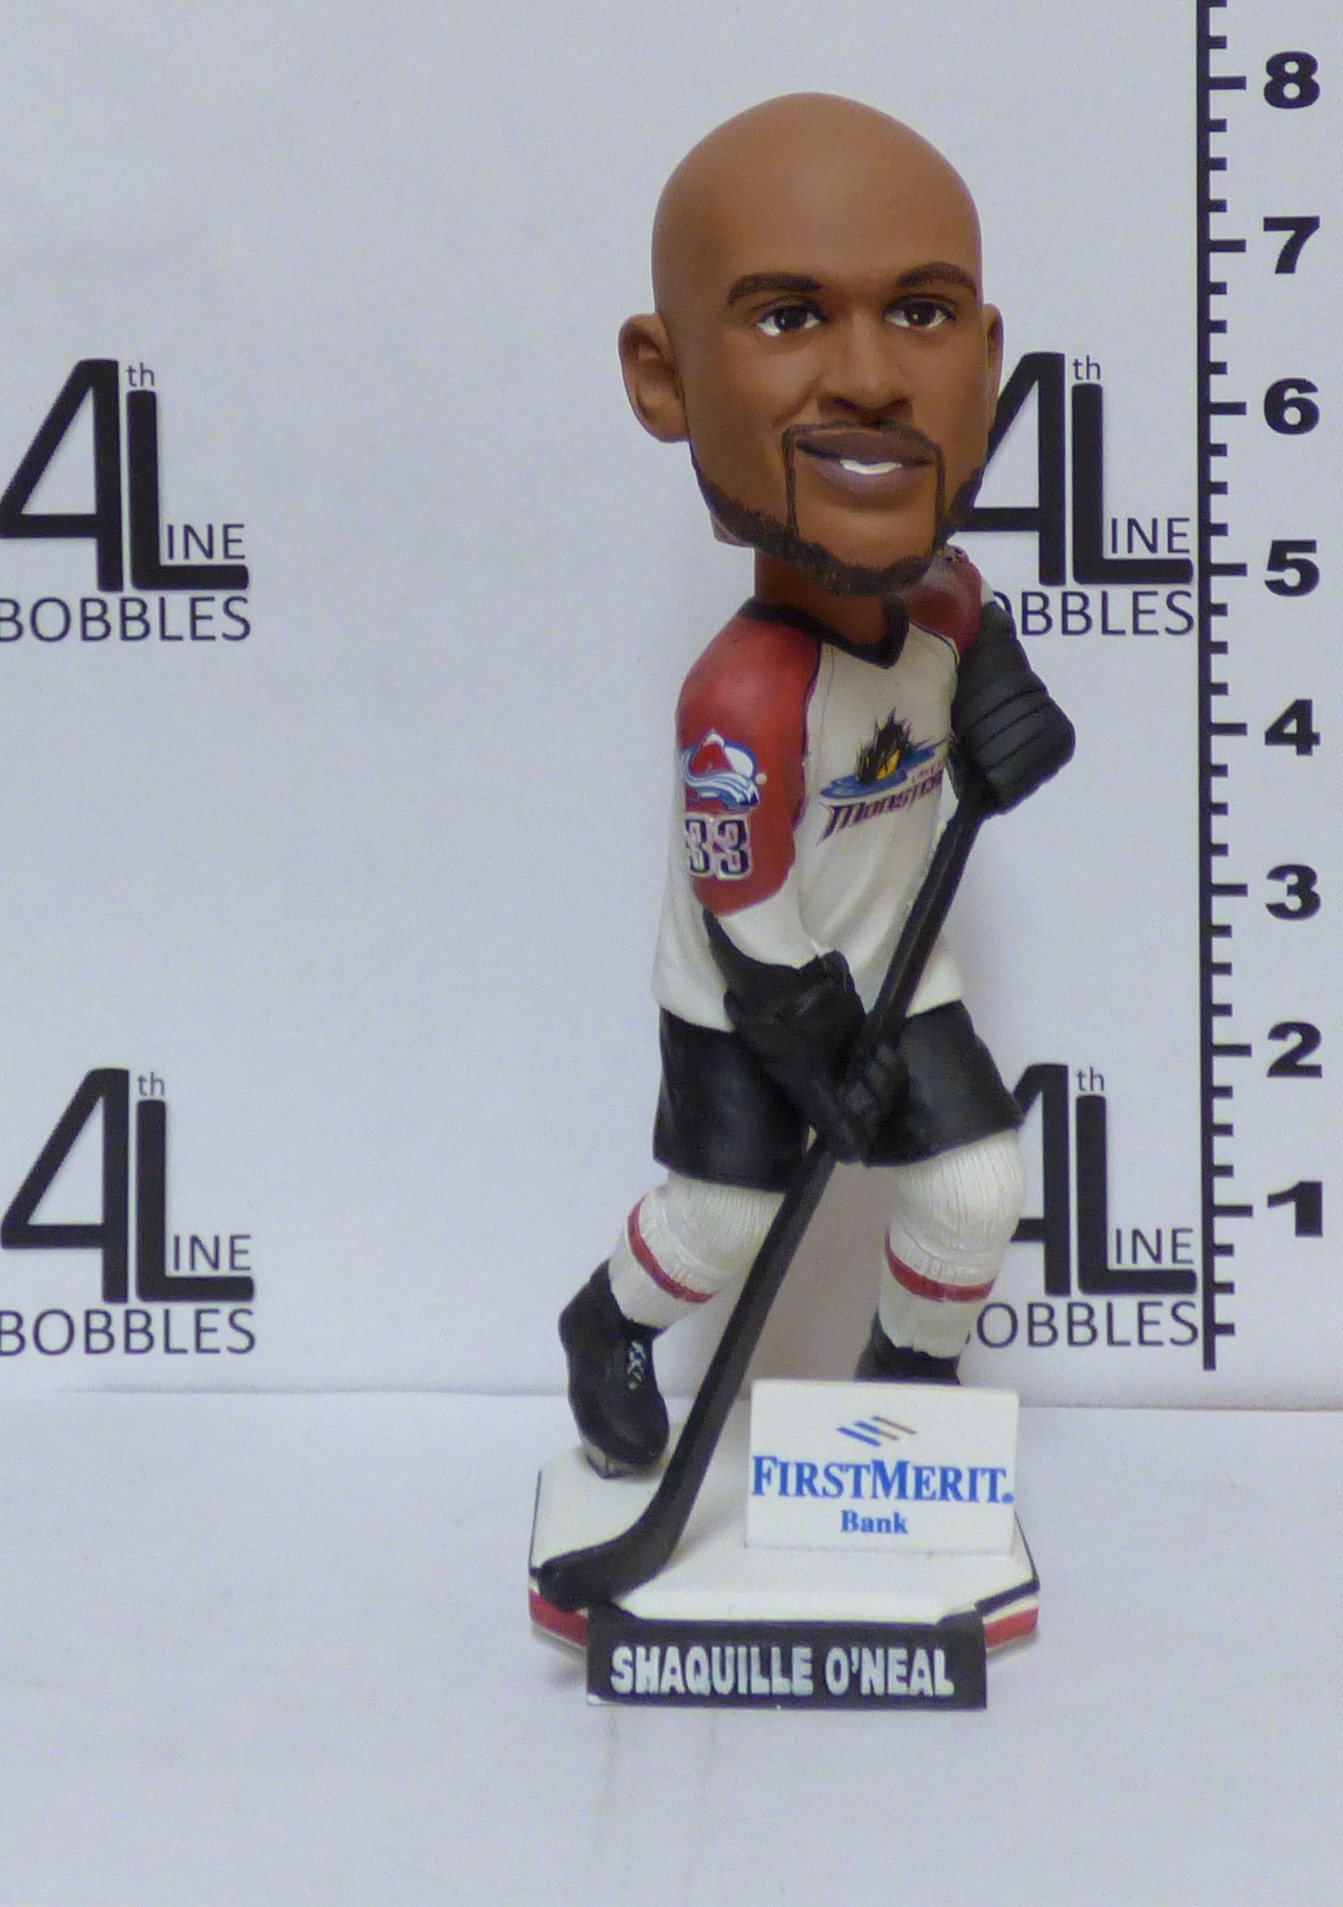 Shaquille O'Neal bobblehead